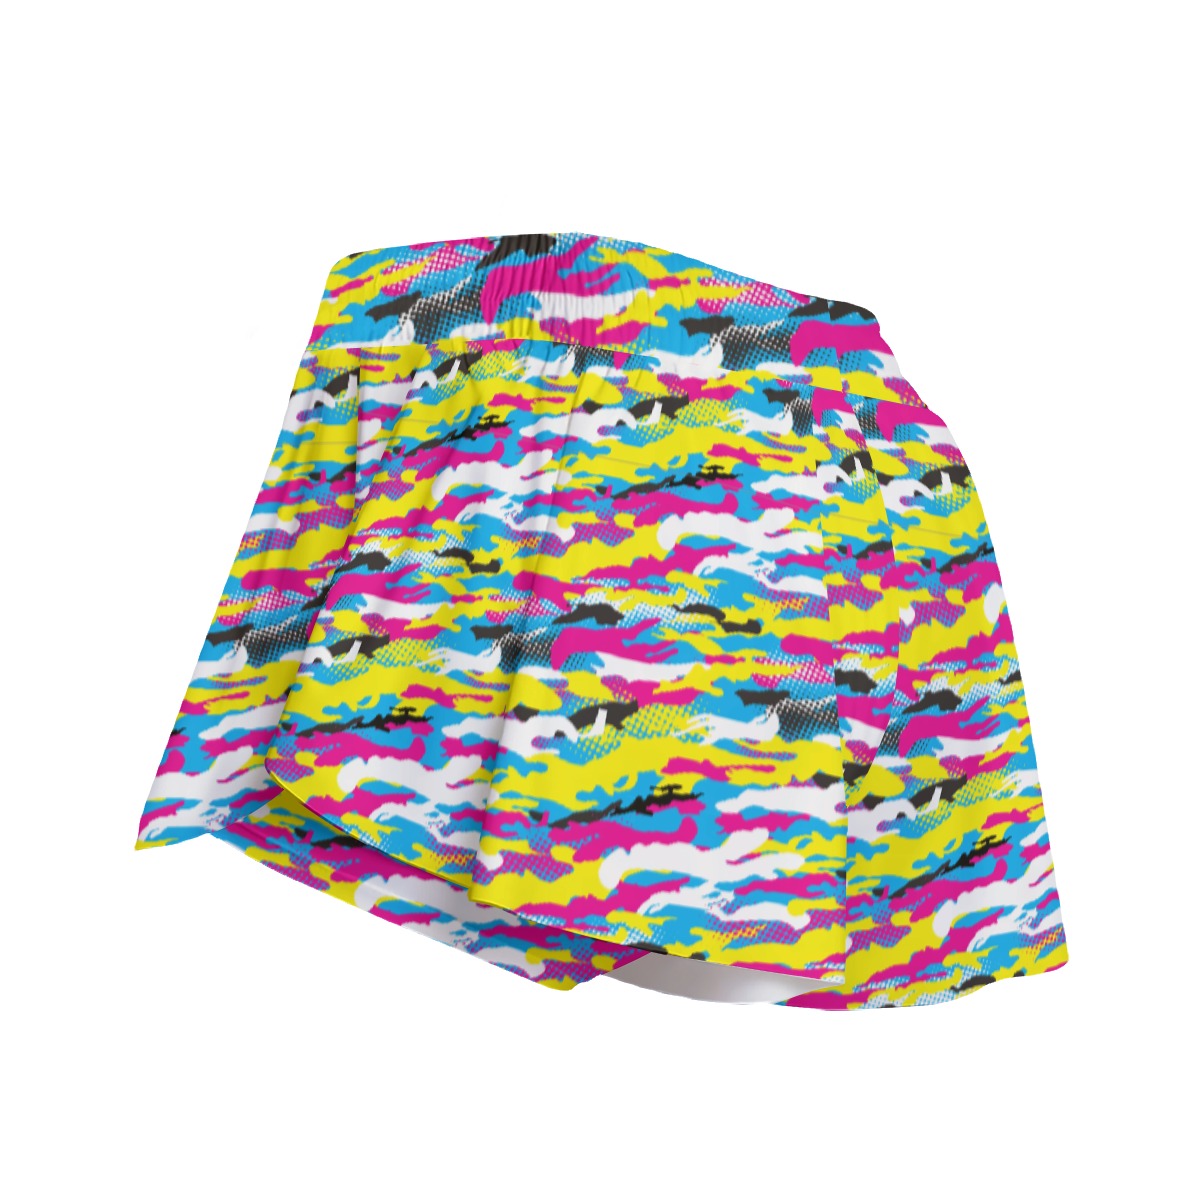 Printed Athletic Skort with Pocket - Neon Camo